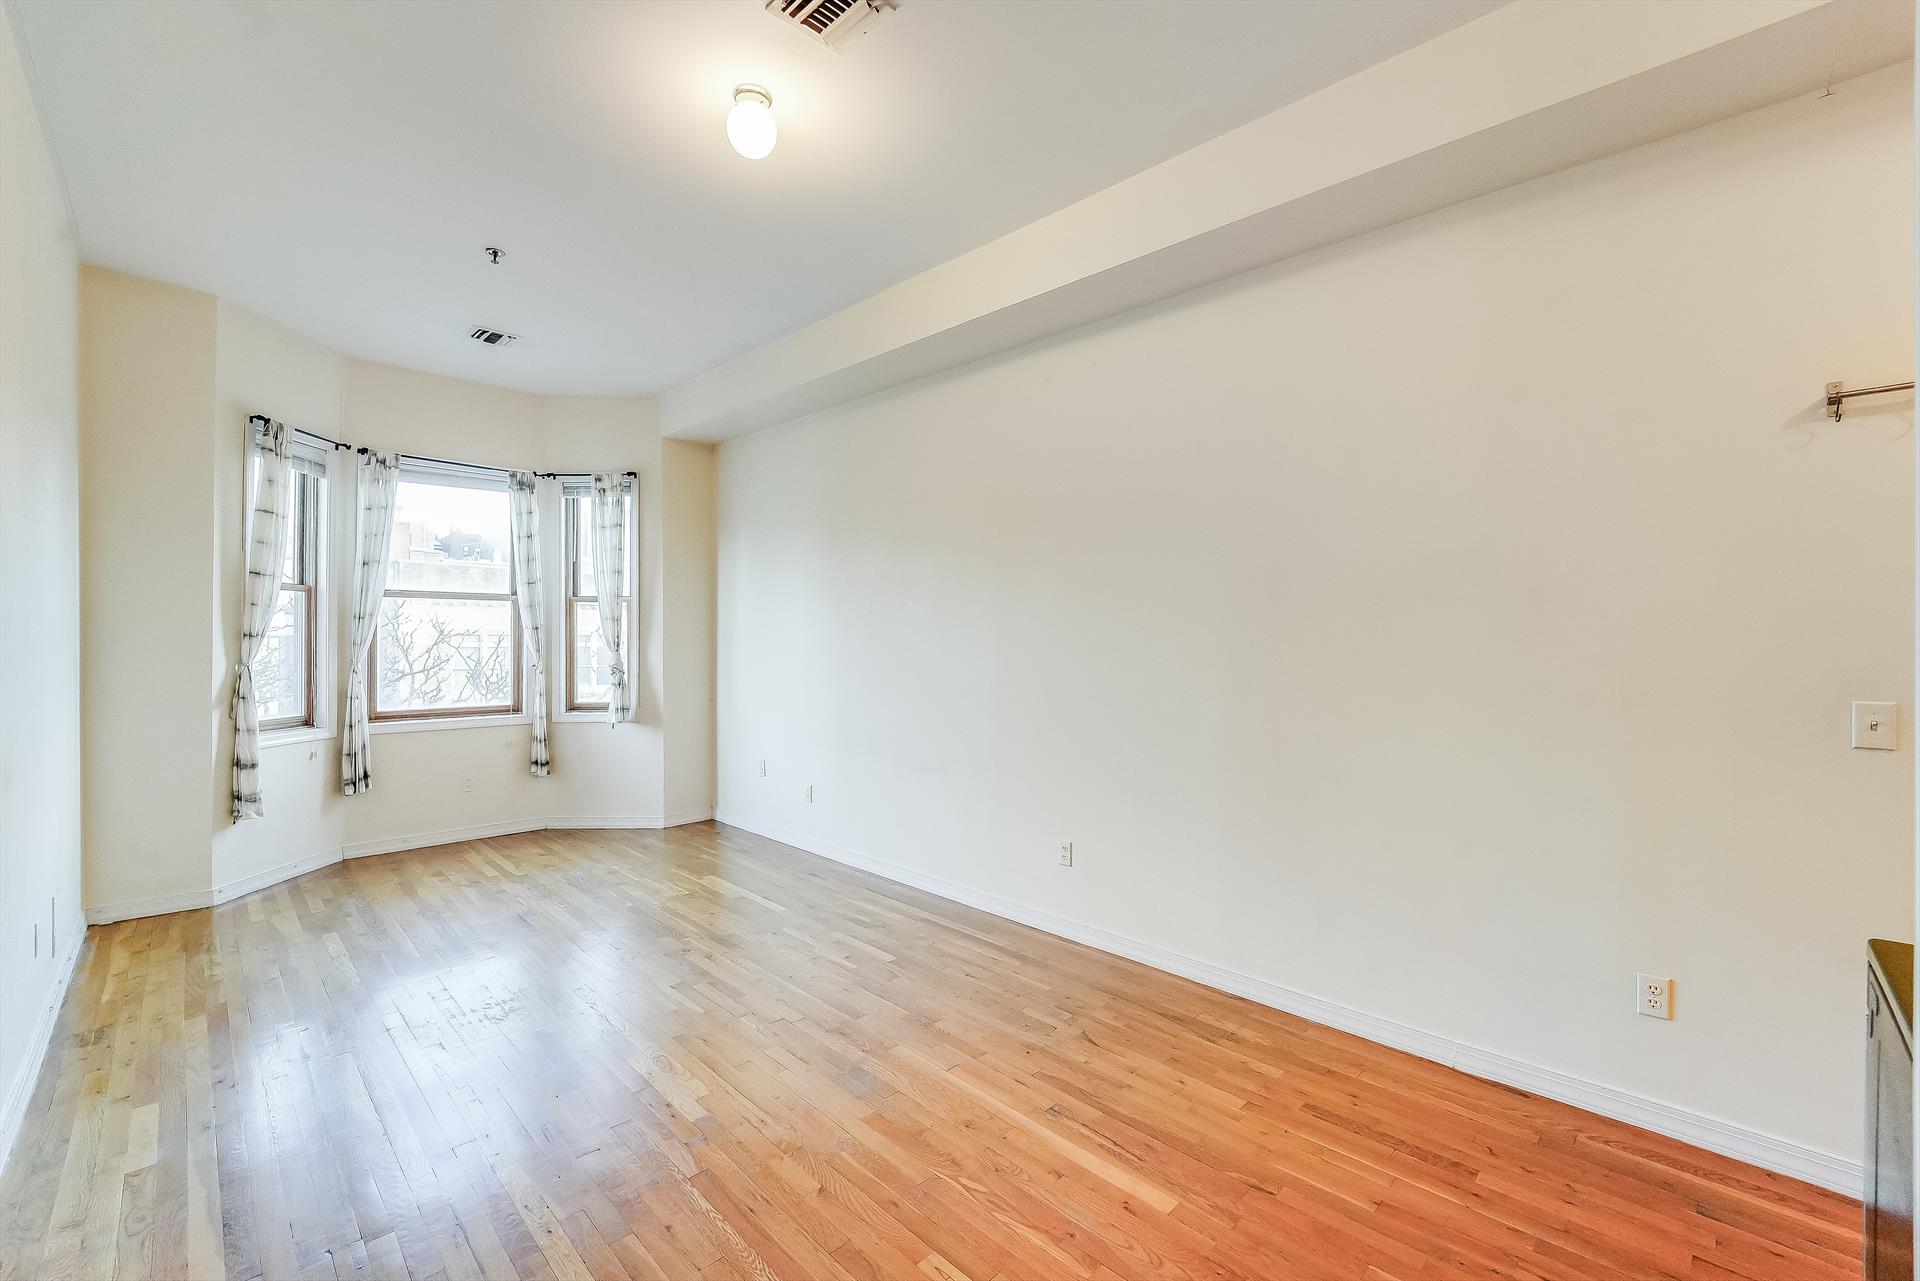 AVAIL 8/1 -- Great size 2 bed 1 bath in a prime location - Unit features high ceilings /  Central air and heat / hardwood floors / washer/dryer in bldg. Great space and layout and Private outdoor space. Prime location to all mass transit to NYC, shopping, nightlife, schools, houses of worship, and so much more!  *PICTURES OF SIMILAR UNIT IN BUILDING*